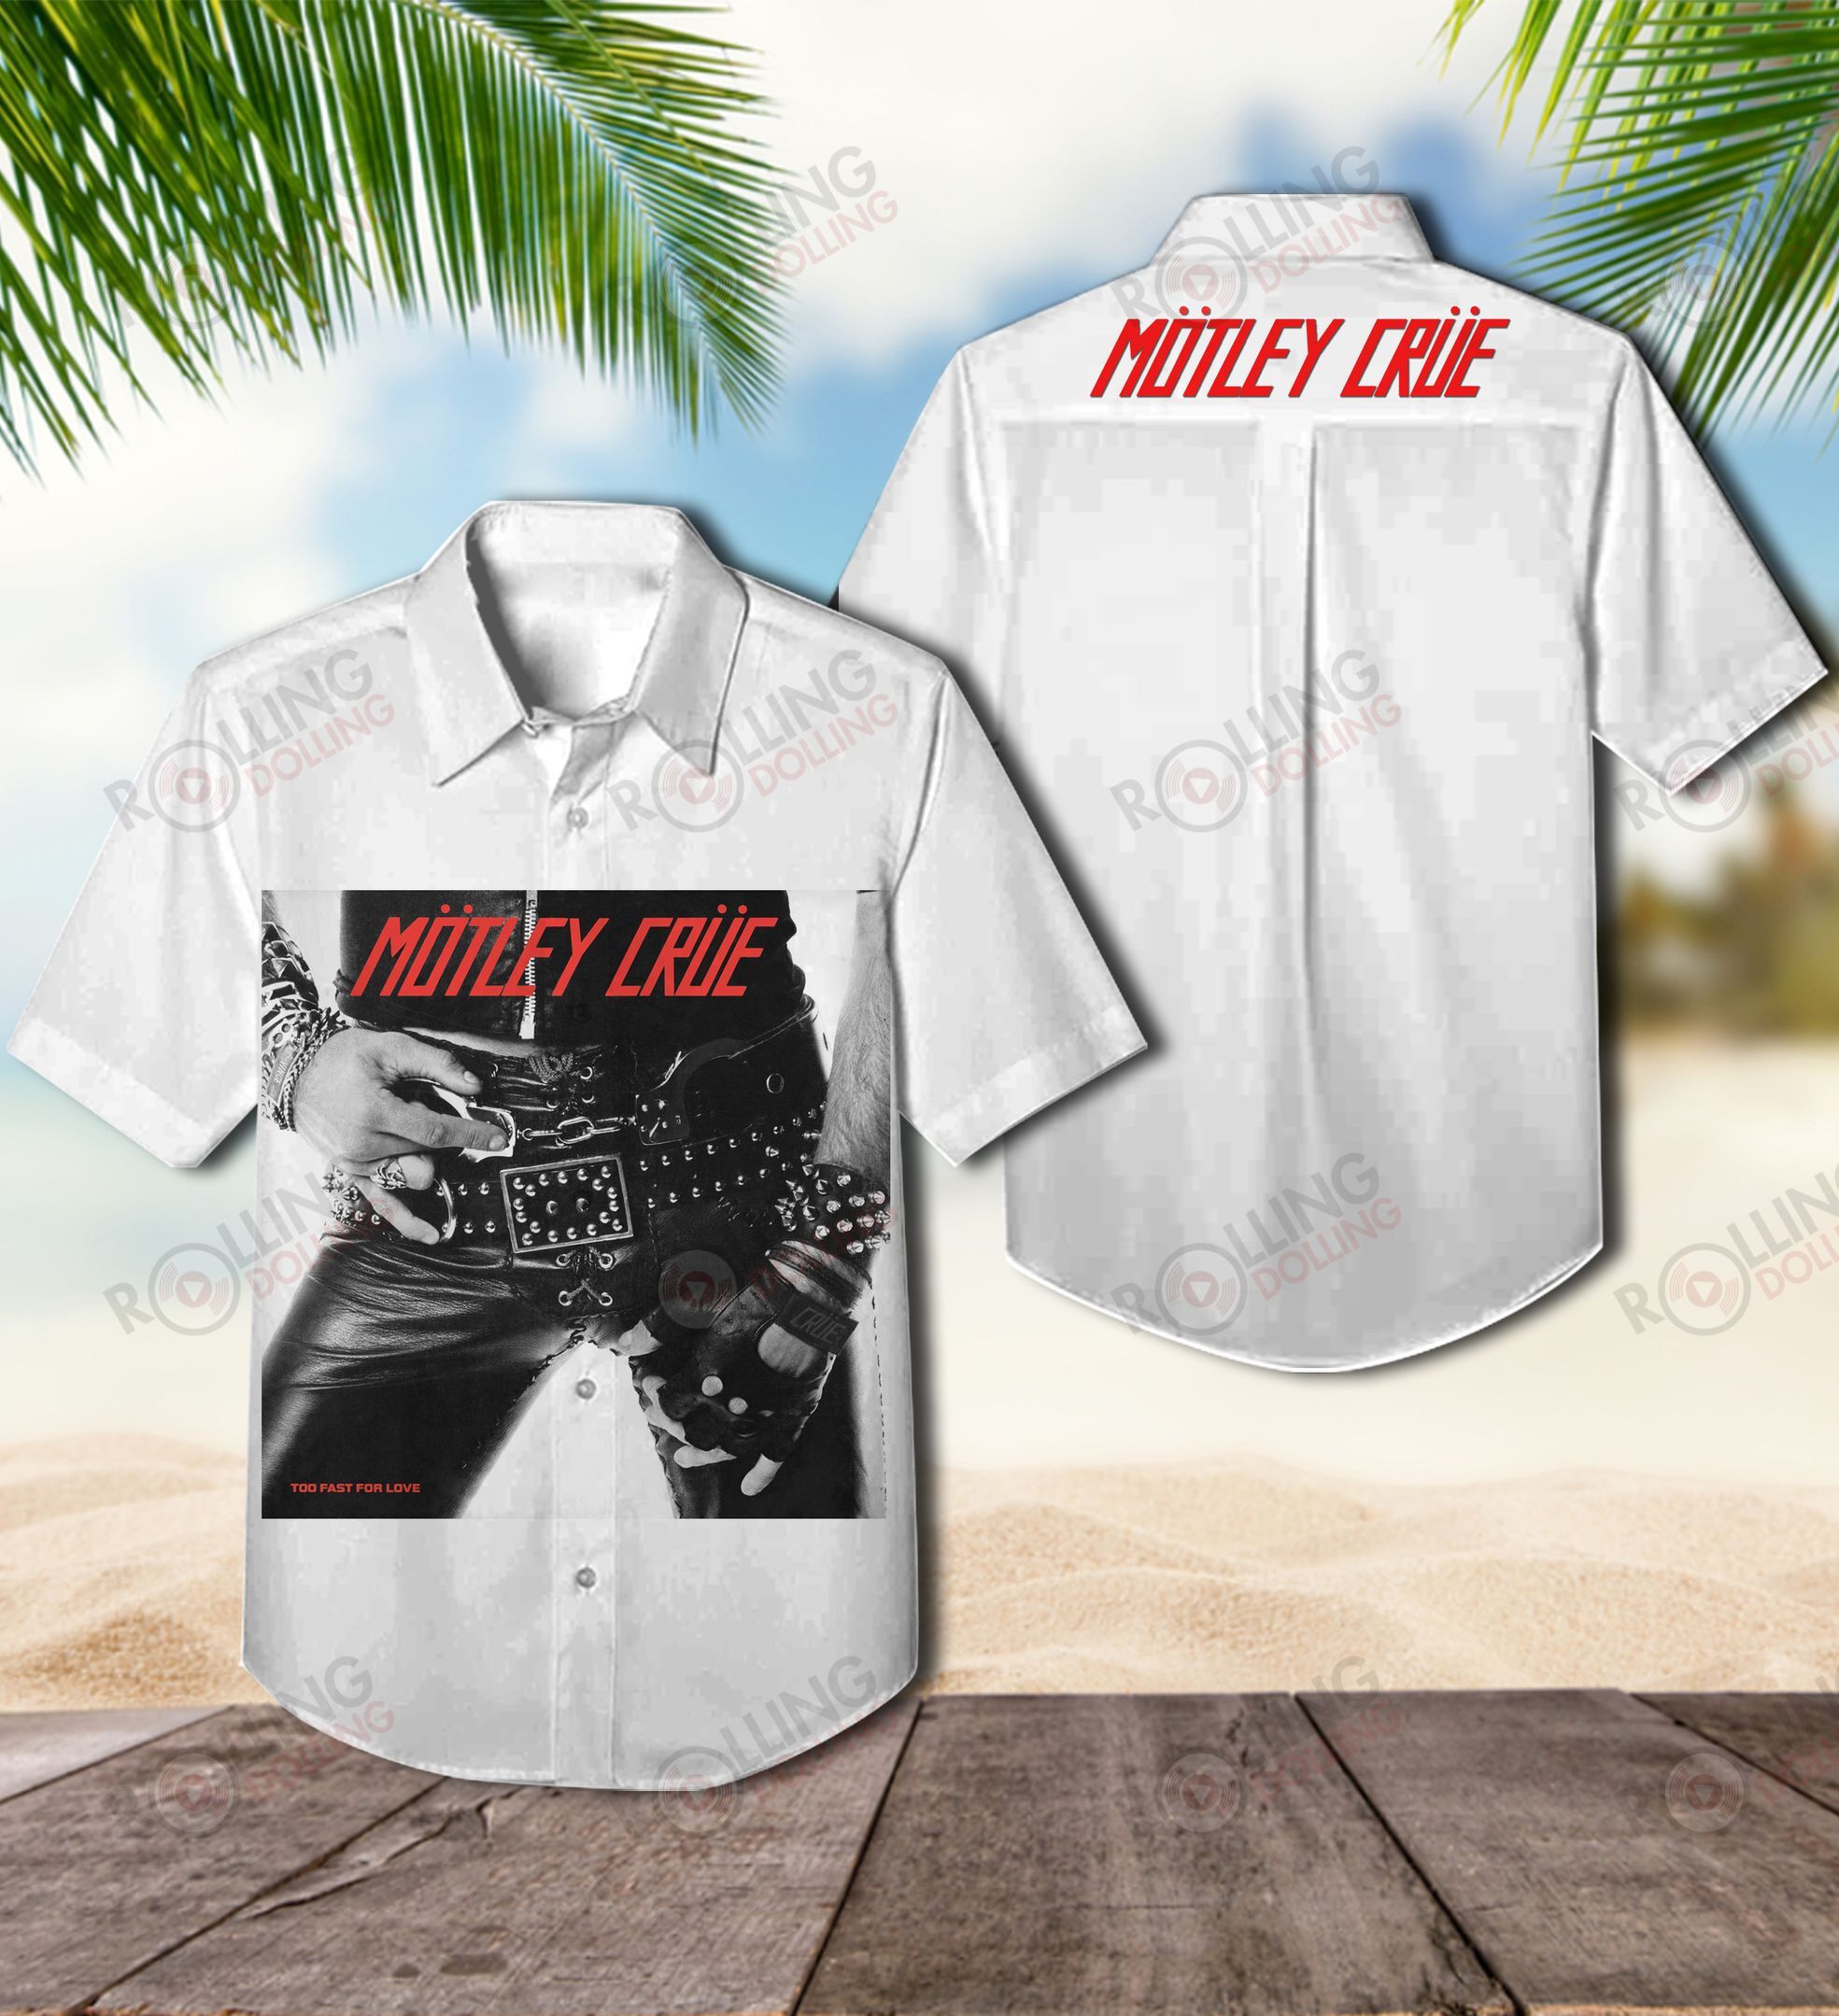 For summer, consider wearing This Amazing Hawaiian Shirt shirt in our store 62